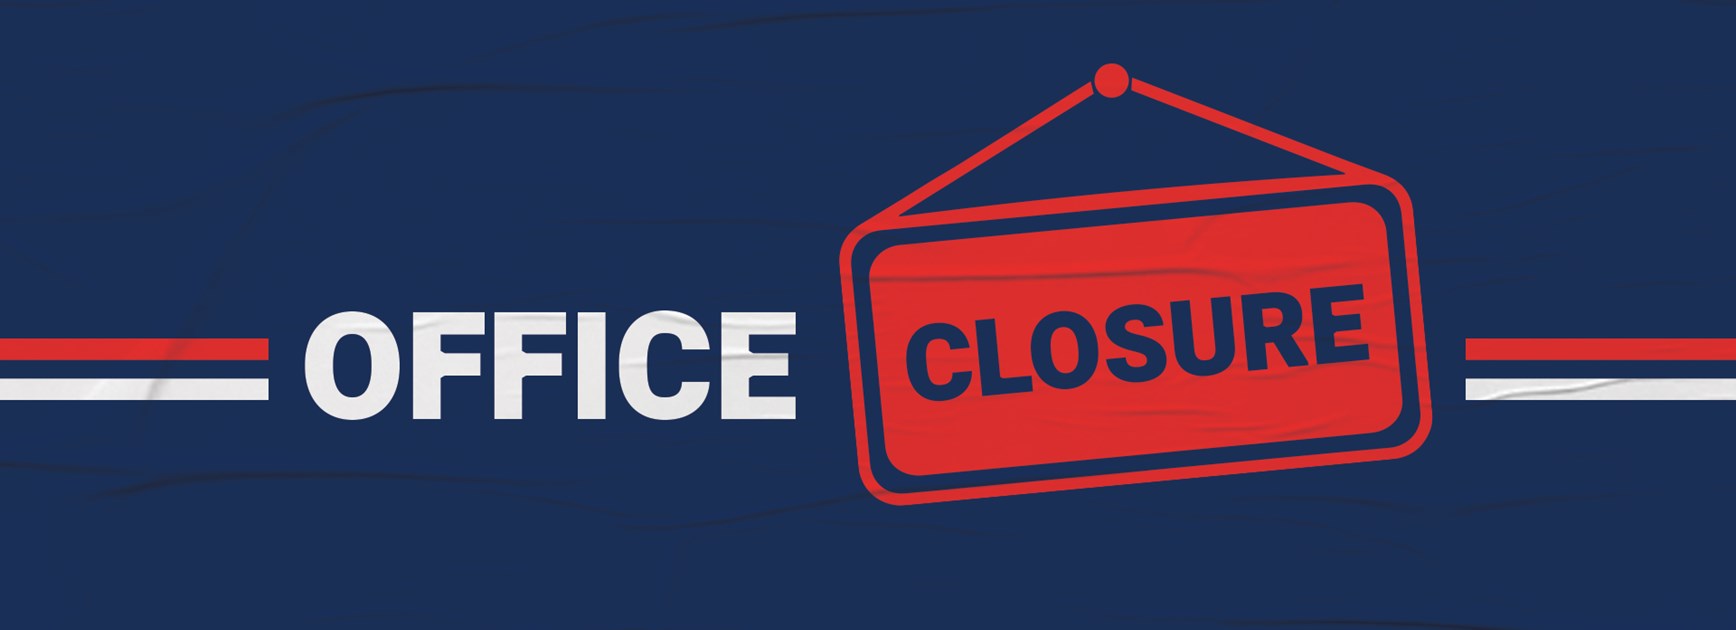 Sydney Roosters Office Closure